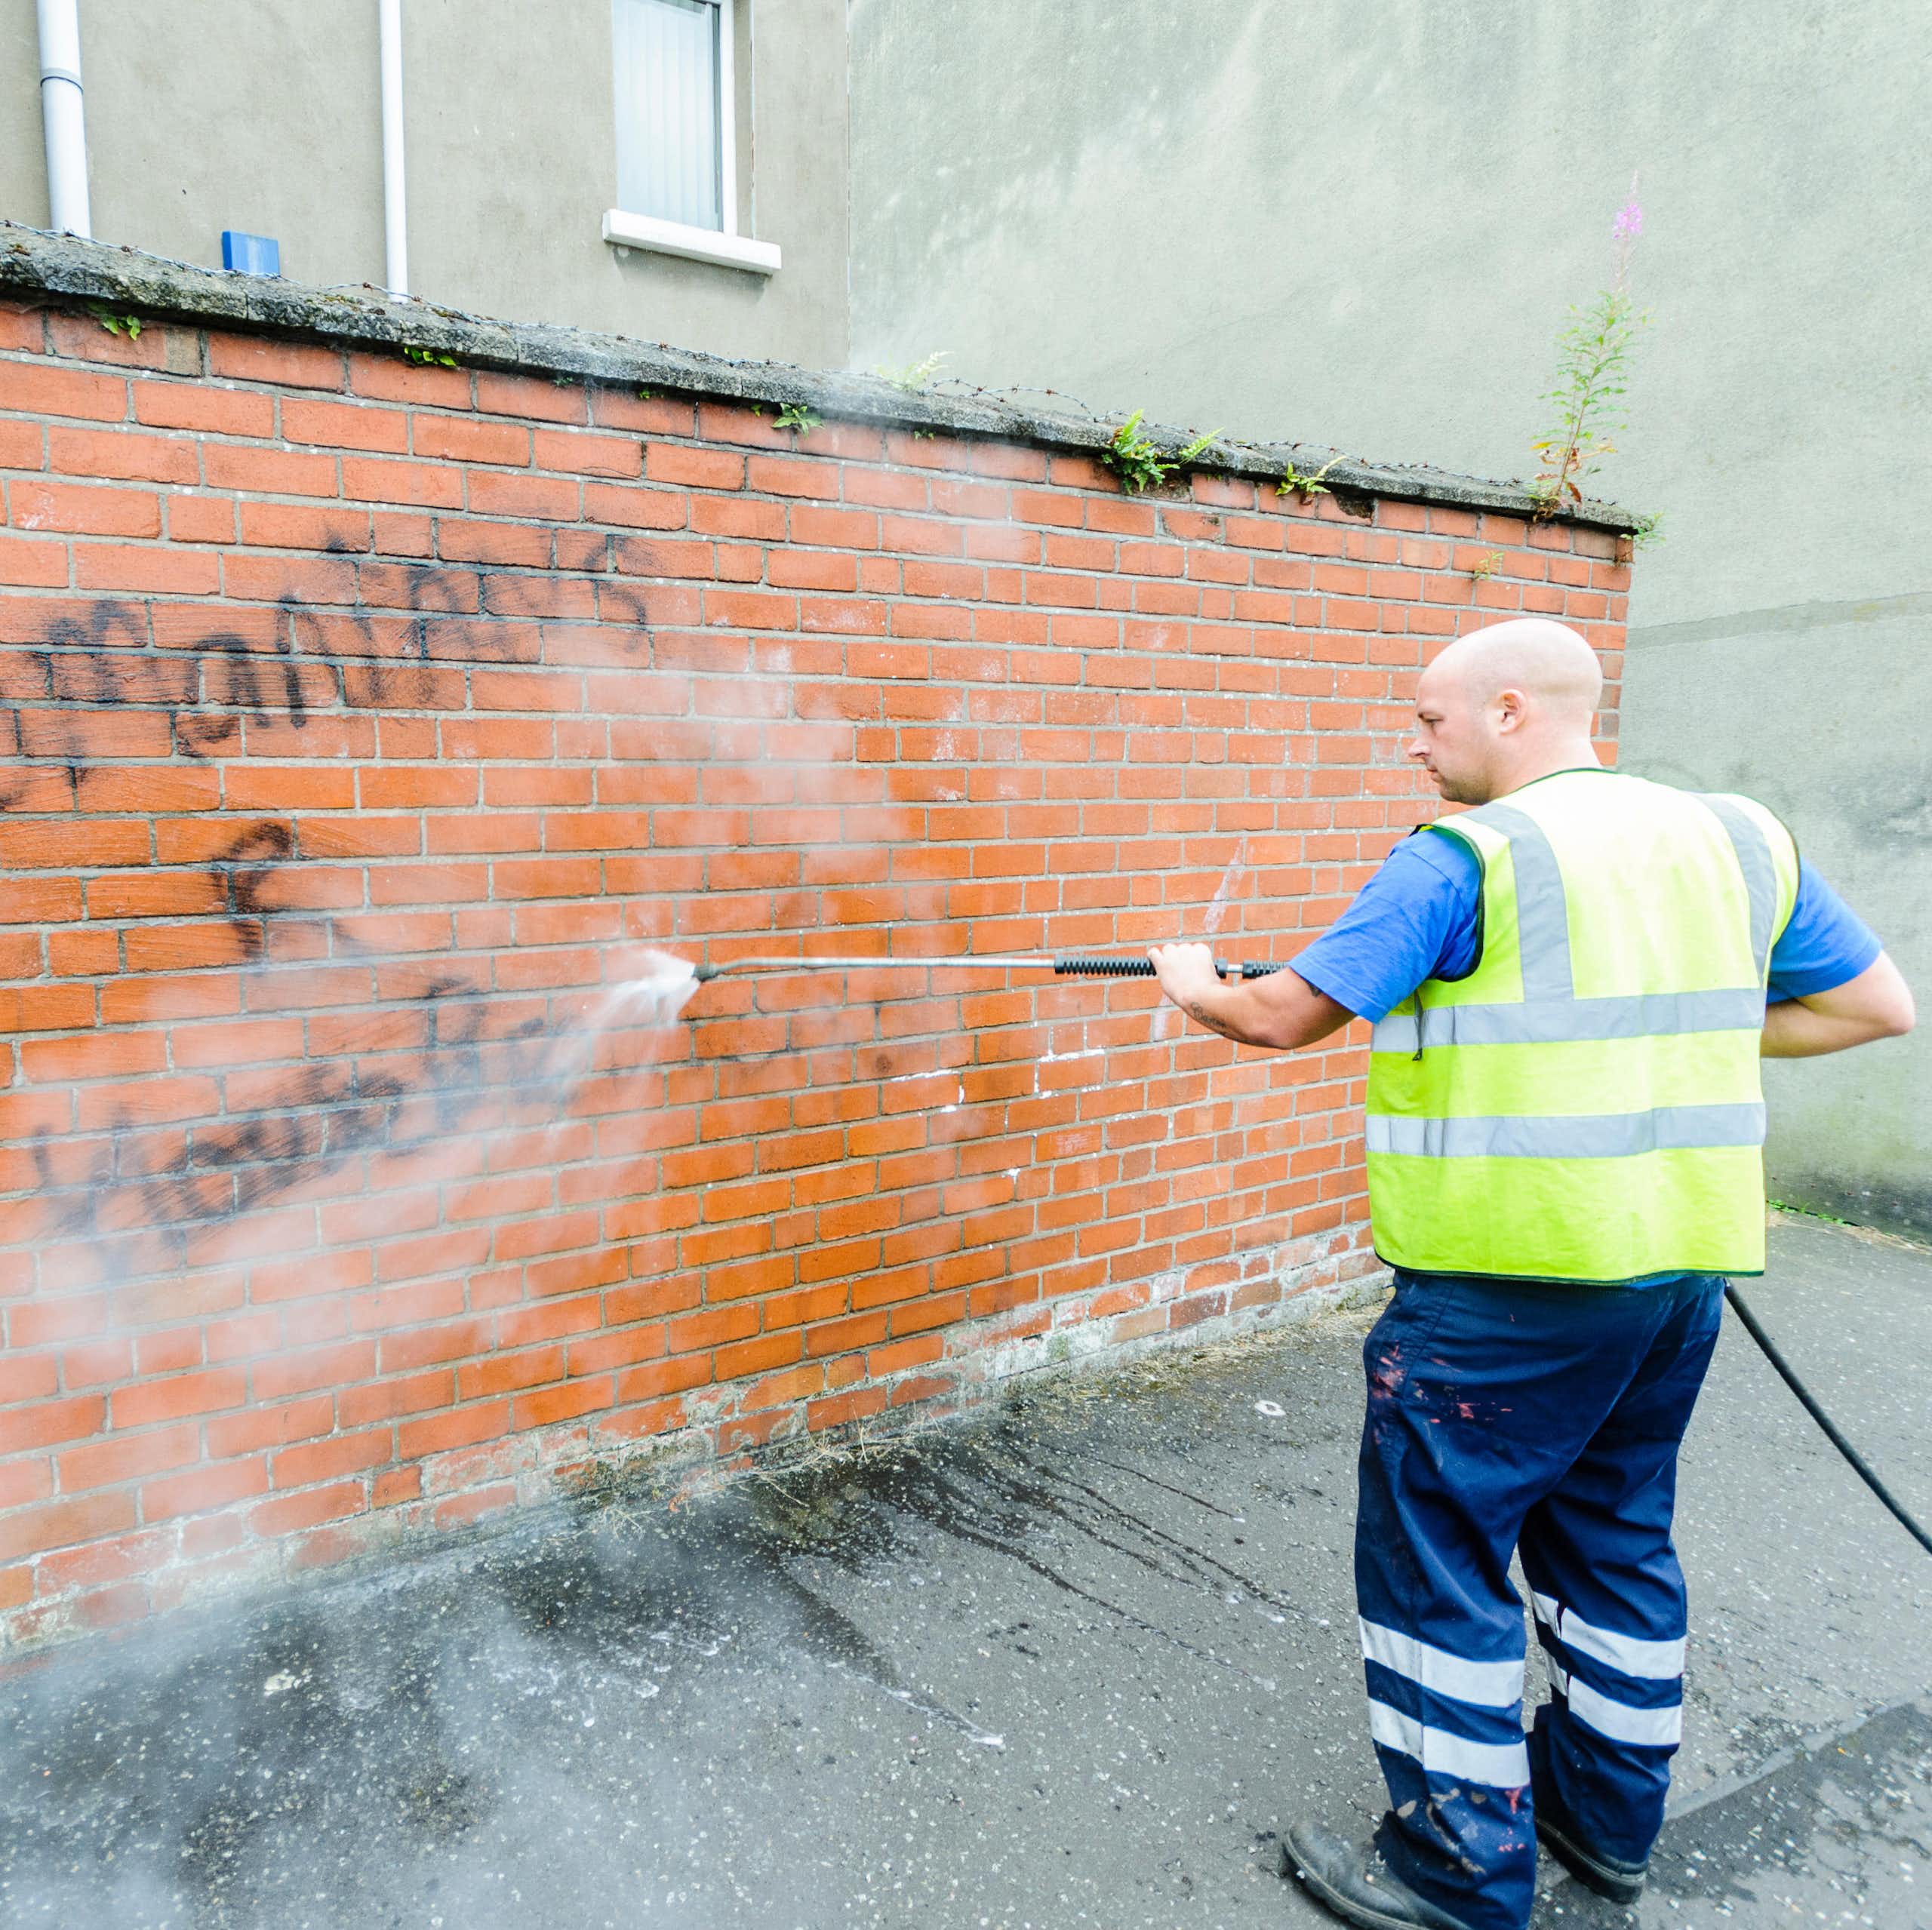 A council worker power washes hateful graffiti off a red brick wall. 